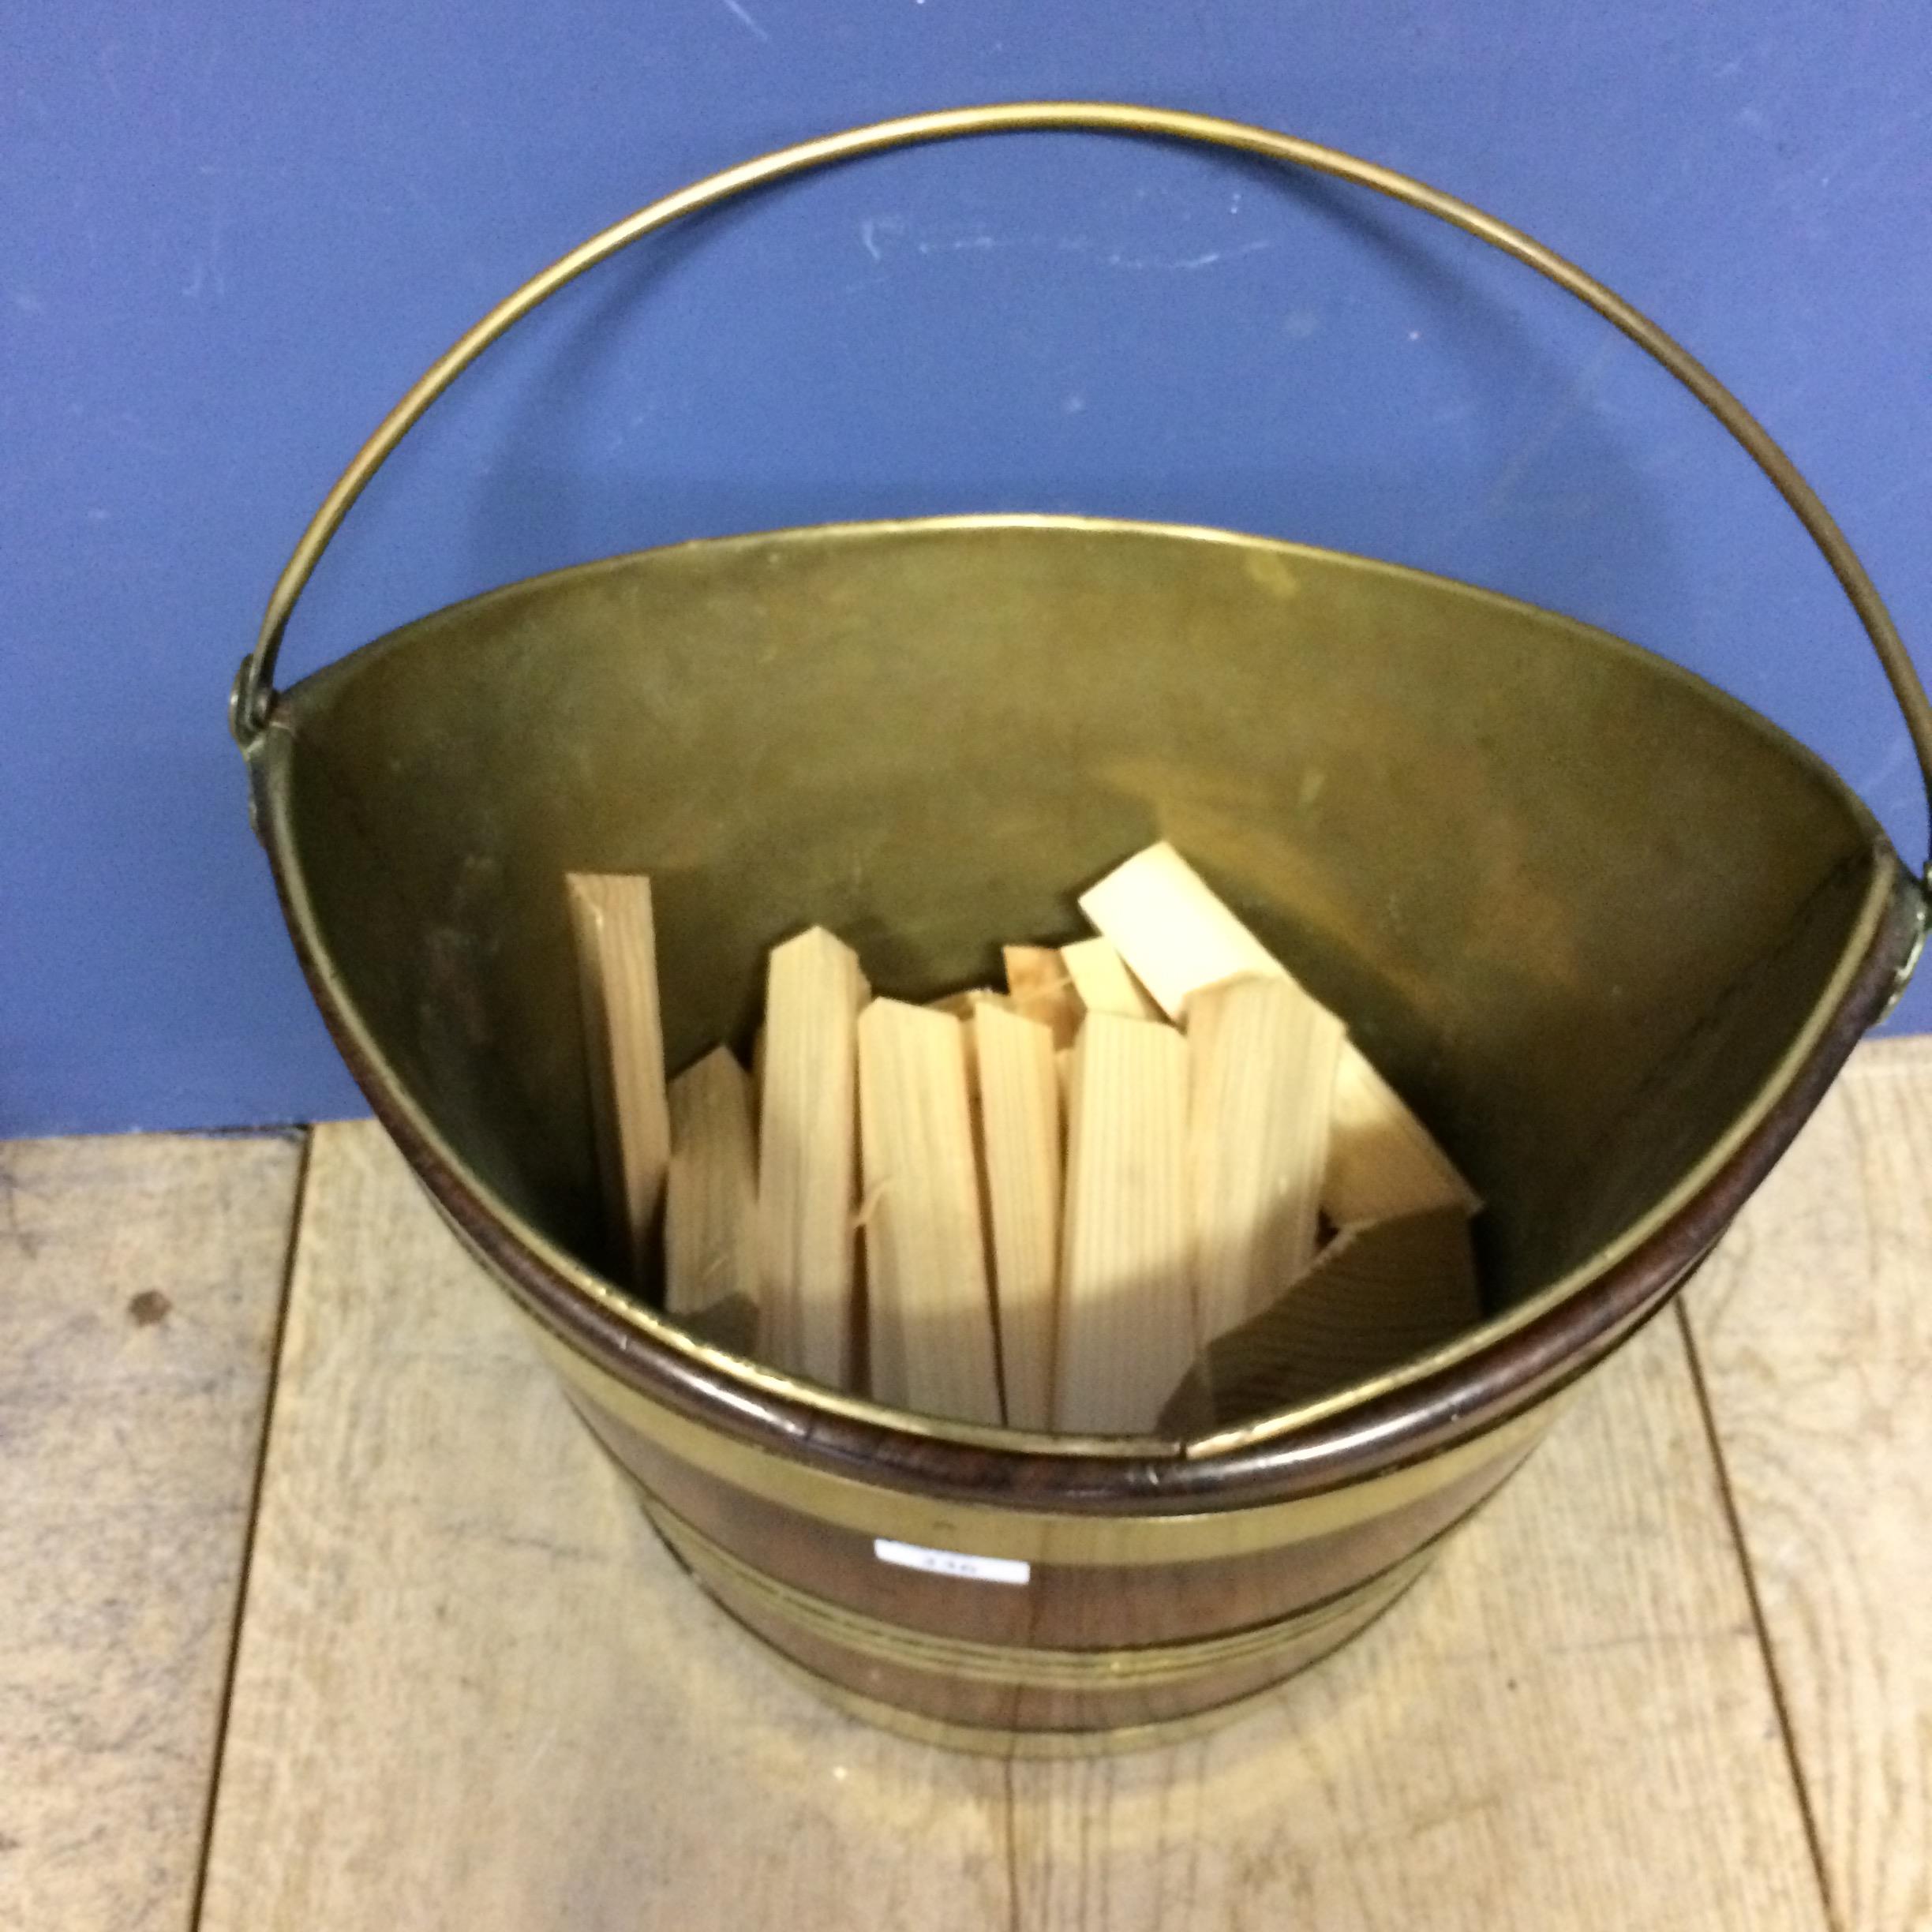 Mahogany and brass bound peat bucket with handle, and with inset brass bucket - Image 2 of 3